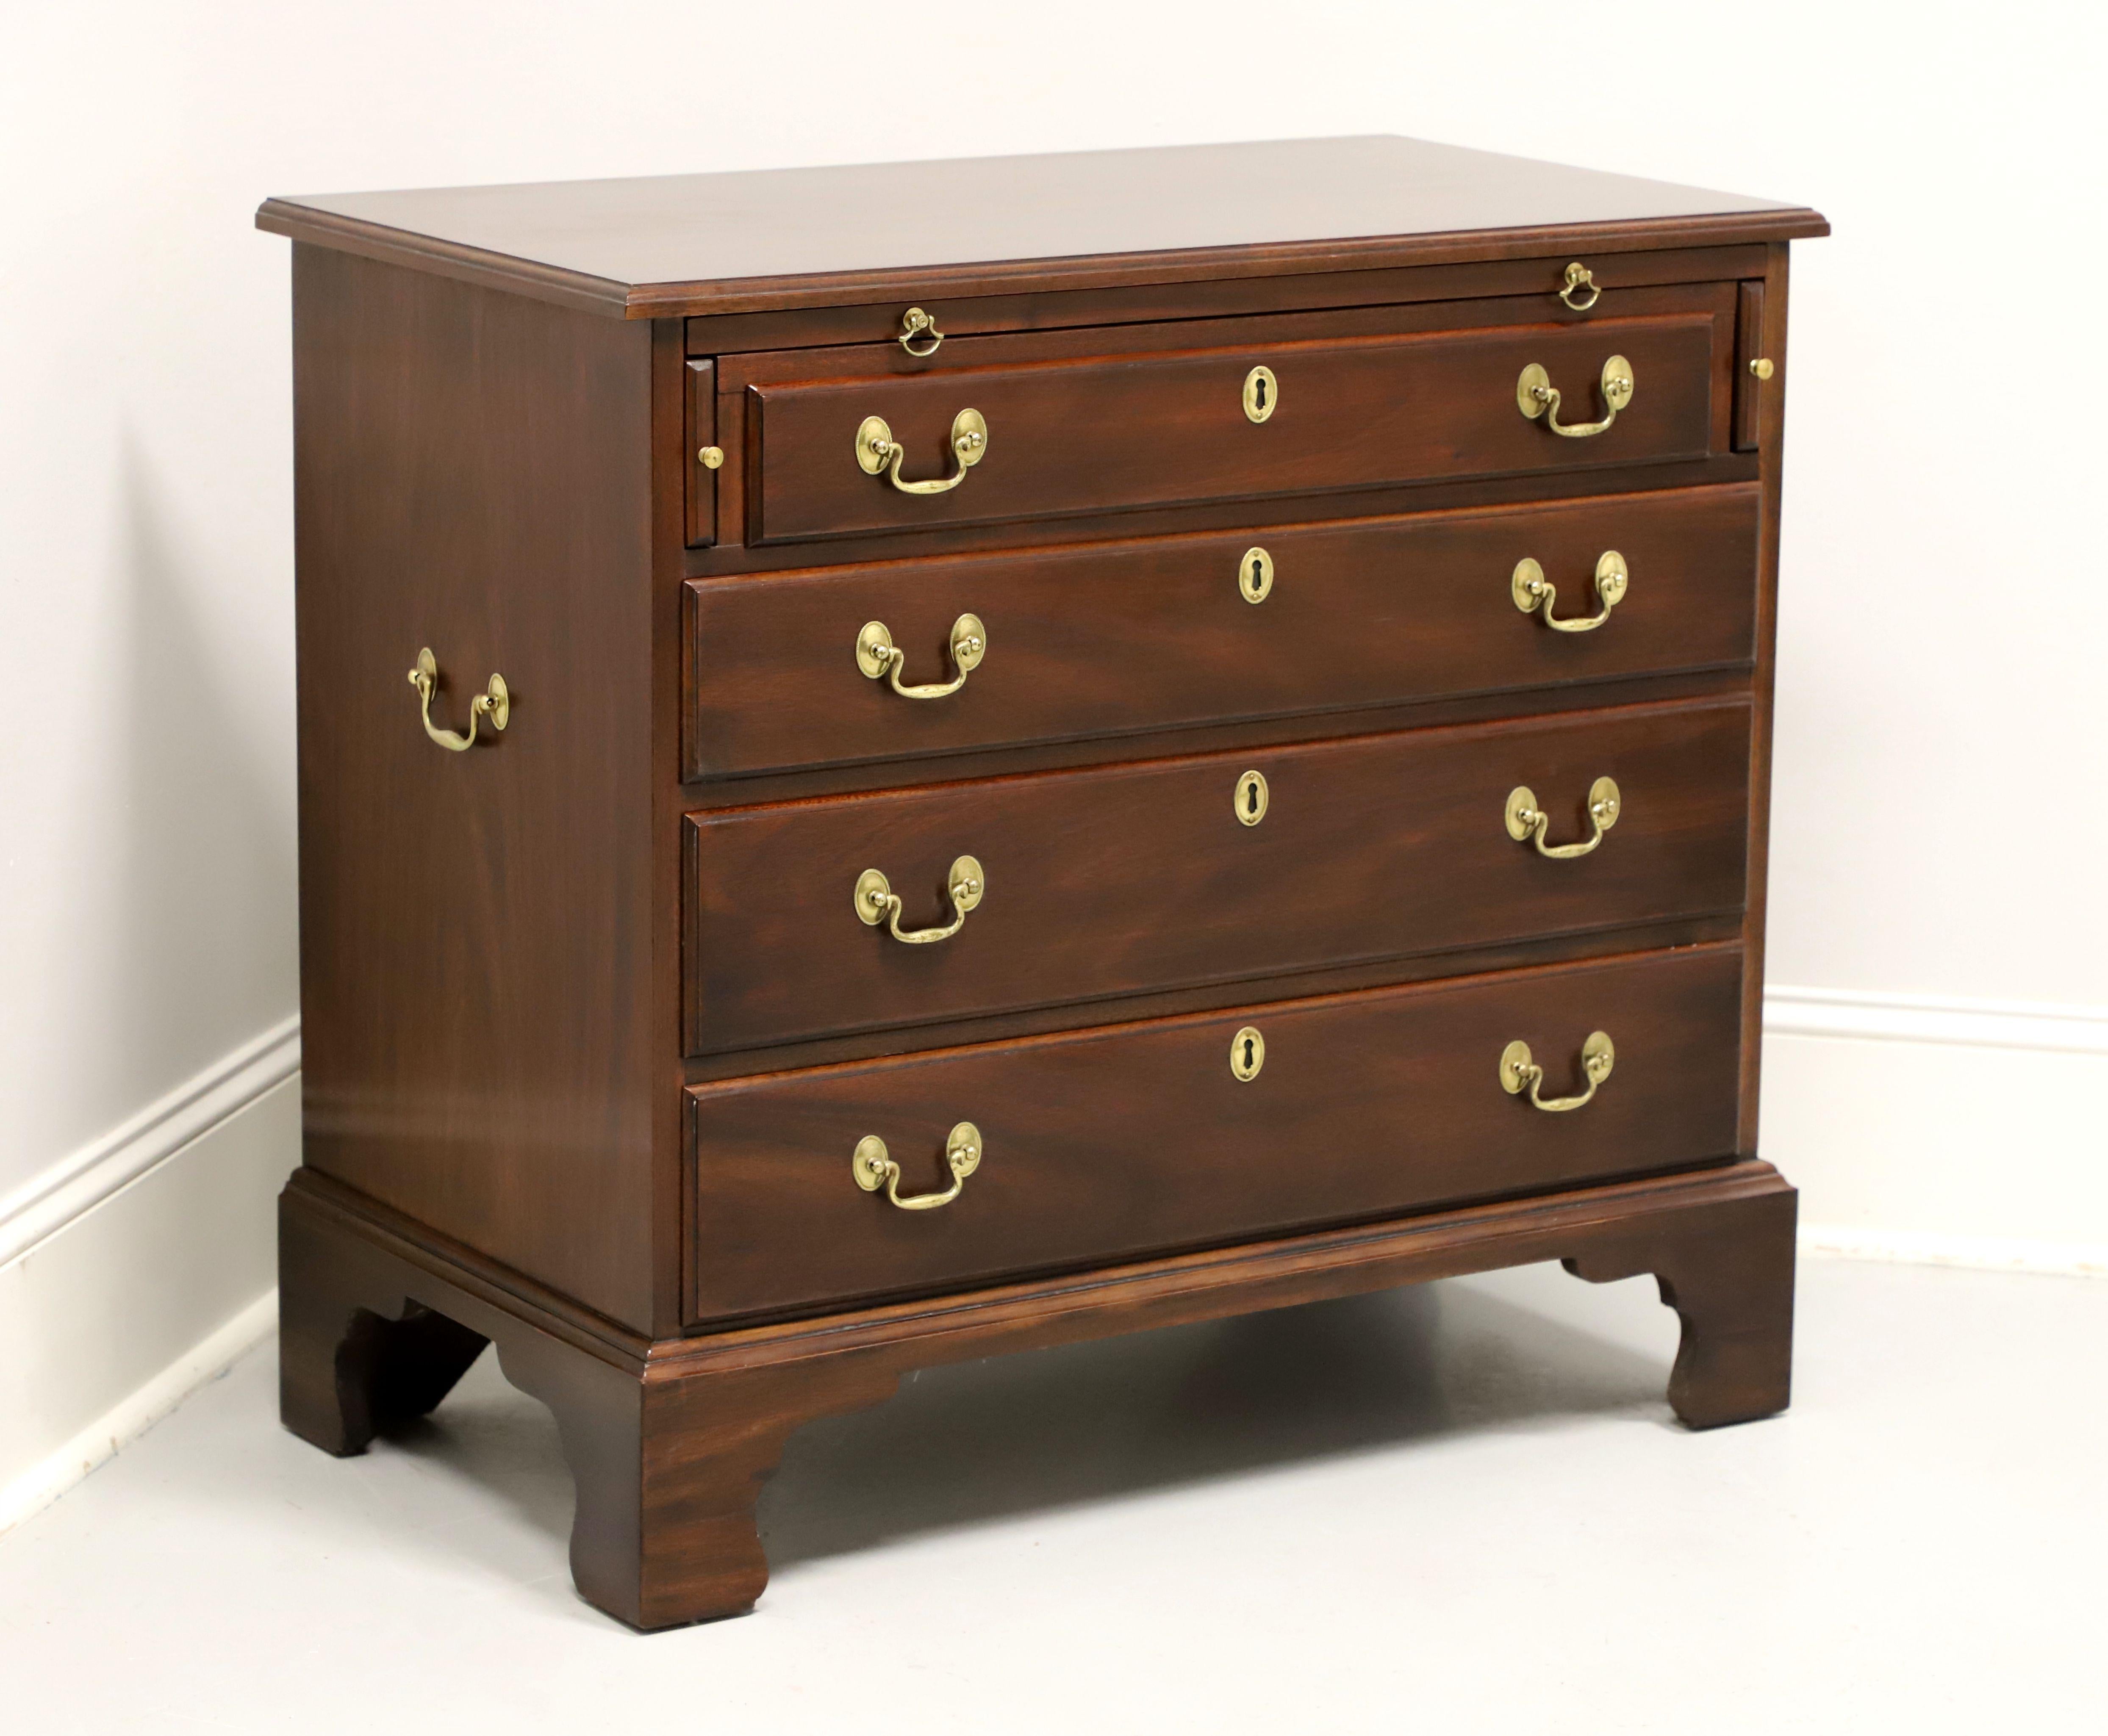 HENKEL HARRIS 2401 29 Mahogany Chippendale Serving Chest For Sale 8